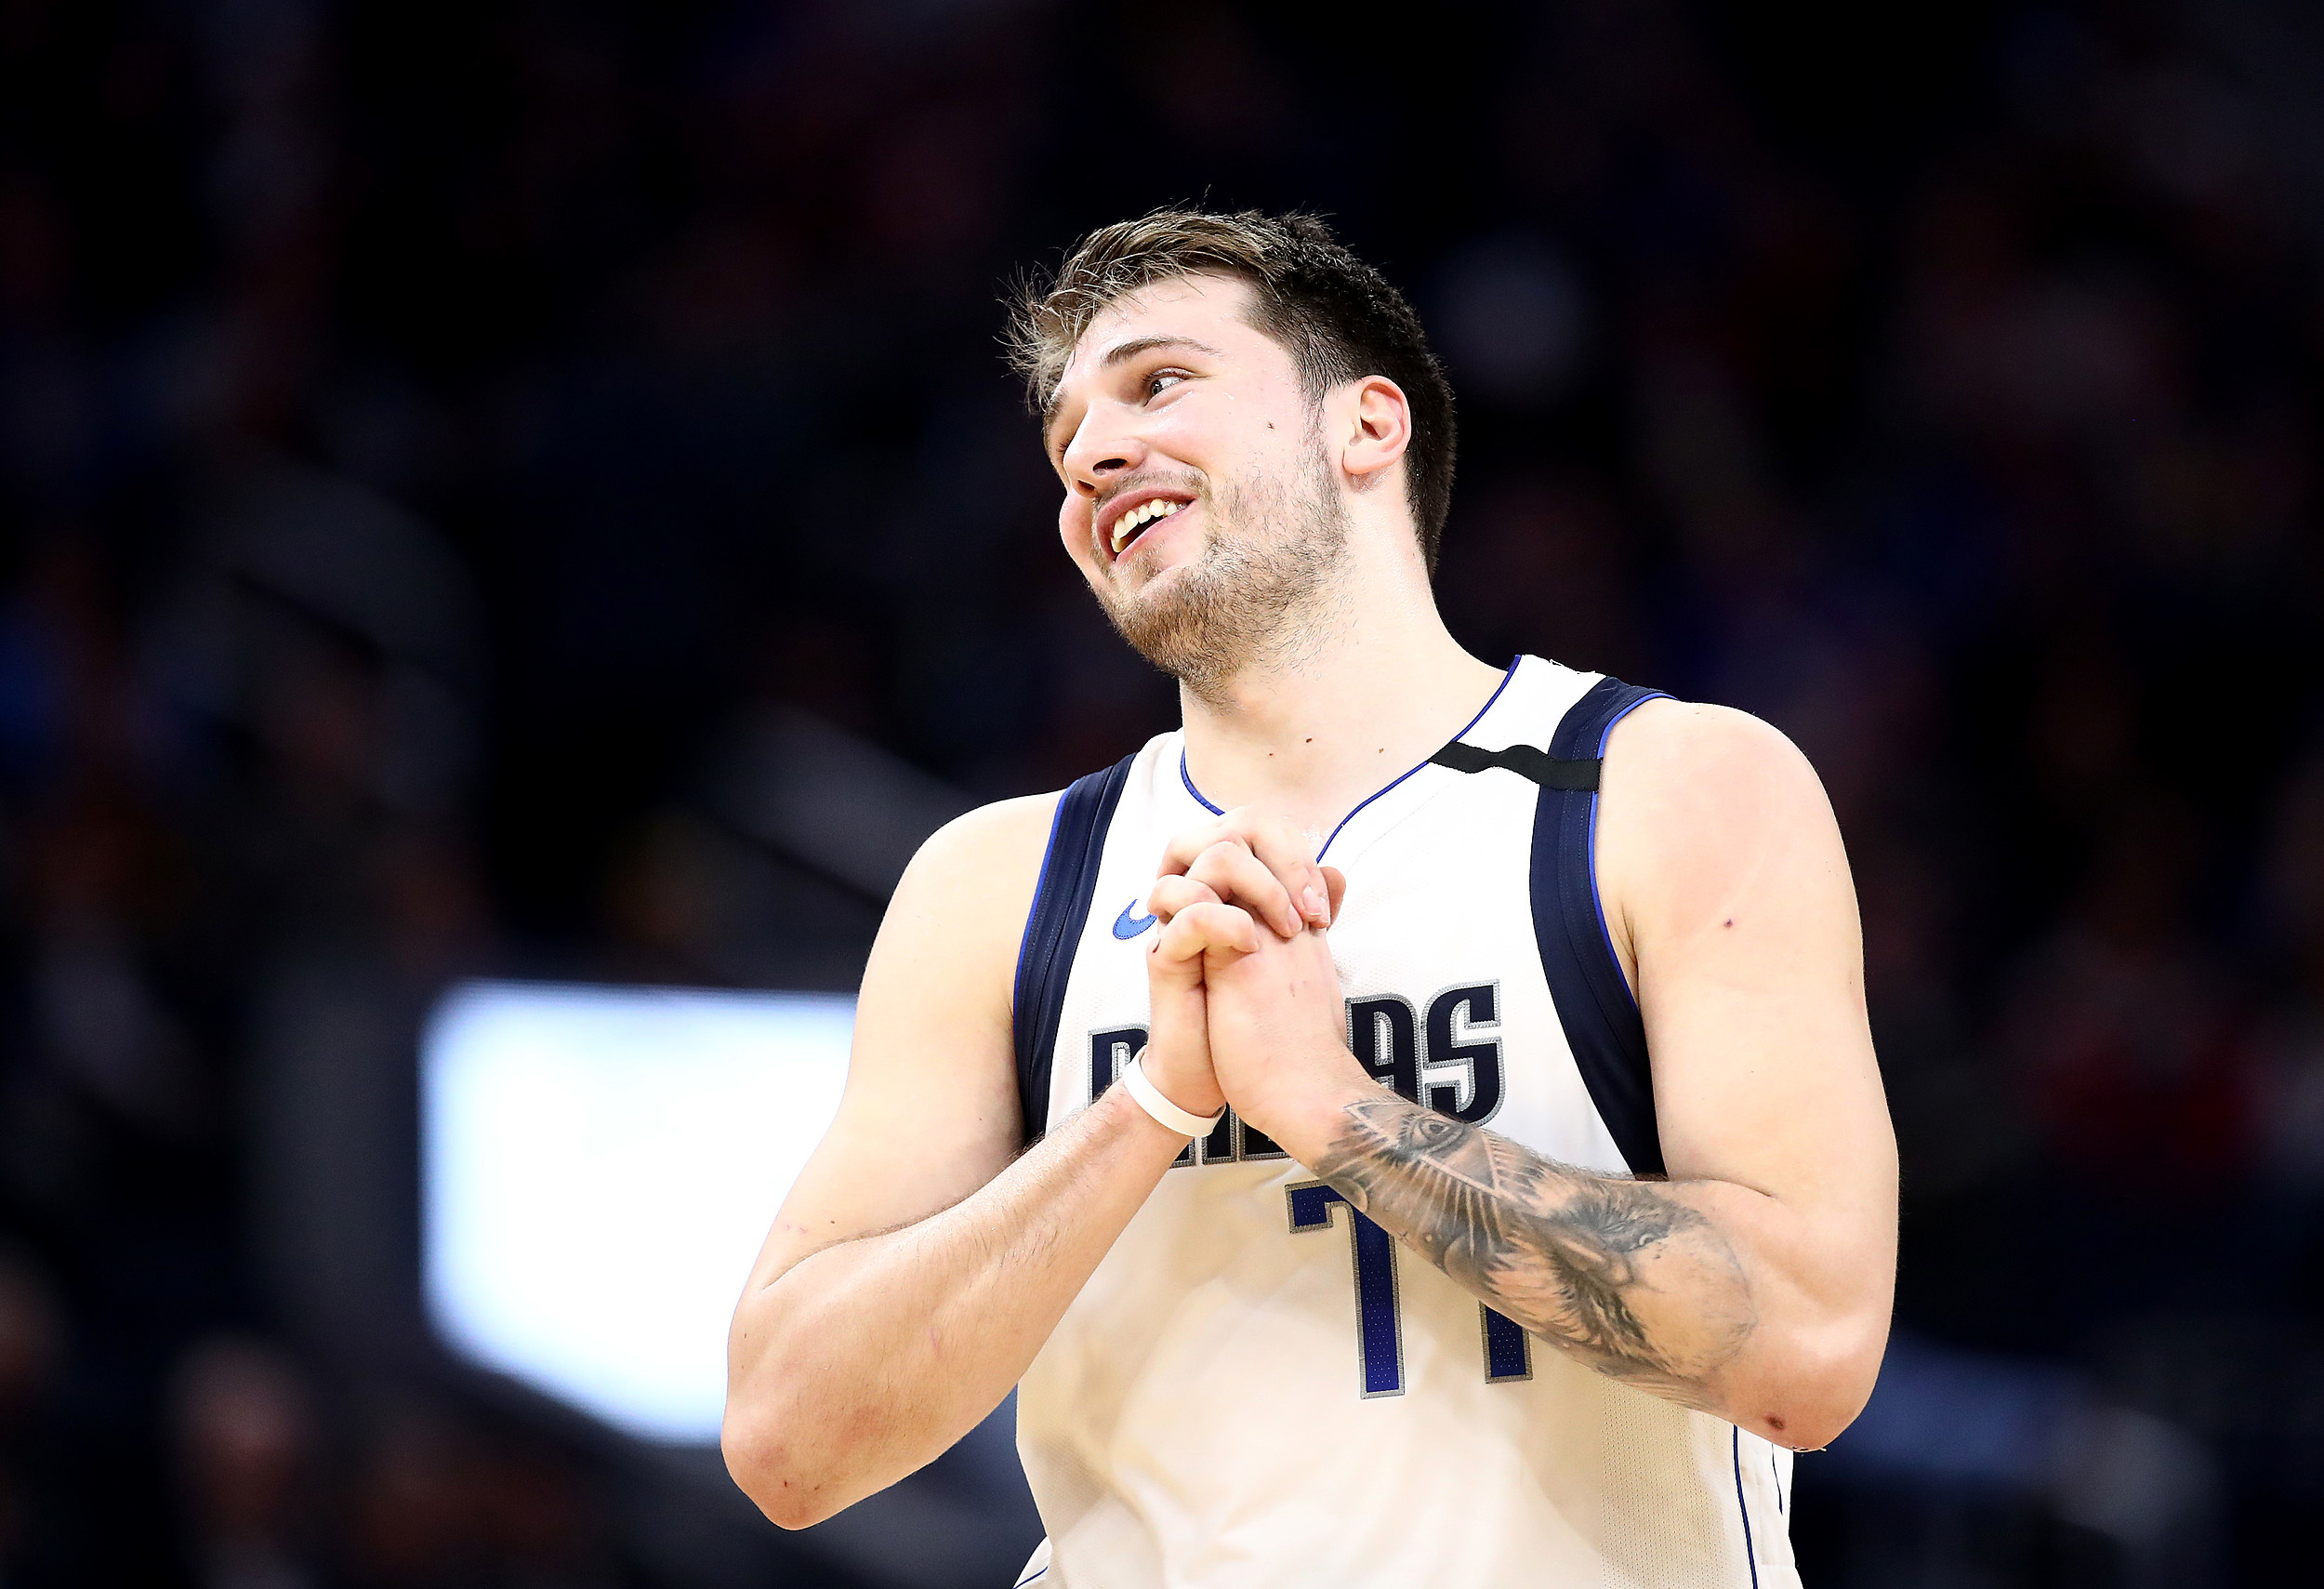 $200+ Million Is a Great Start, but the Mavericks Must Do More